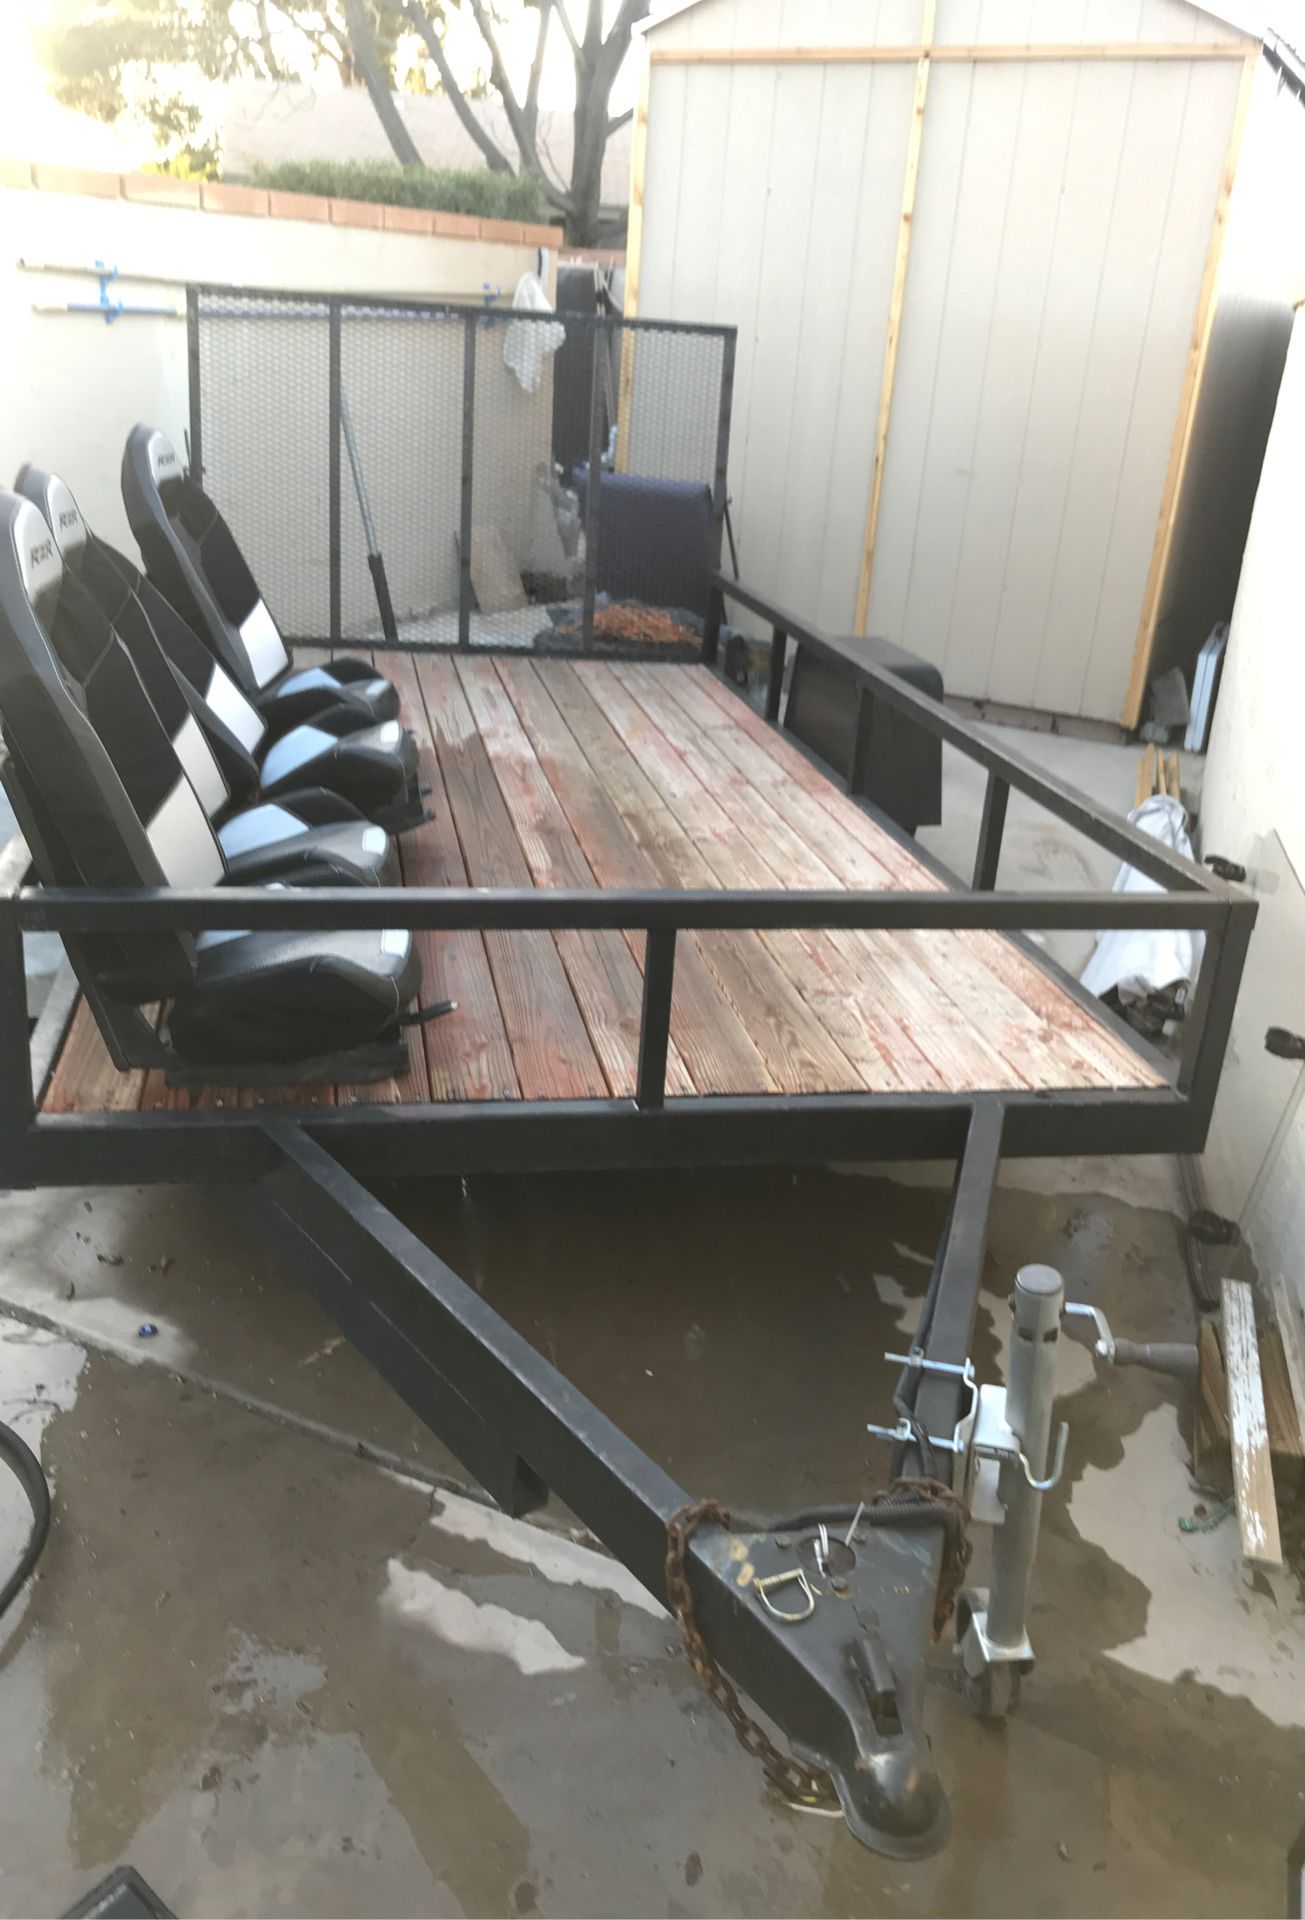 Utility trailer. 12’ x 6’ with lay down ramp. Used to pull my 4 seater Razor.